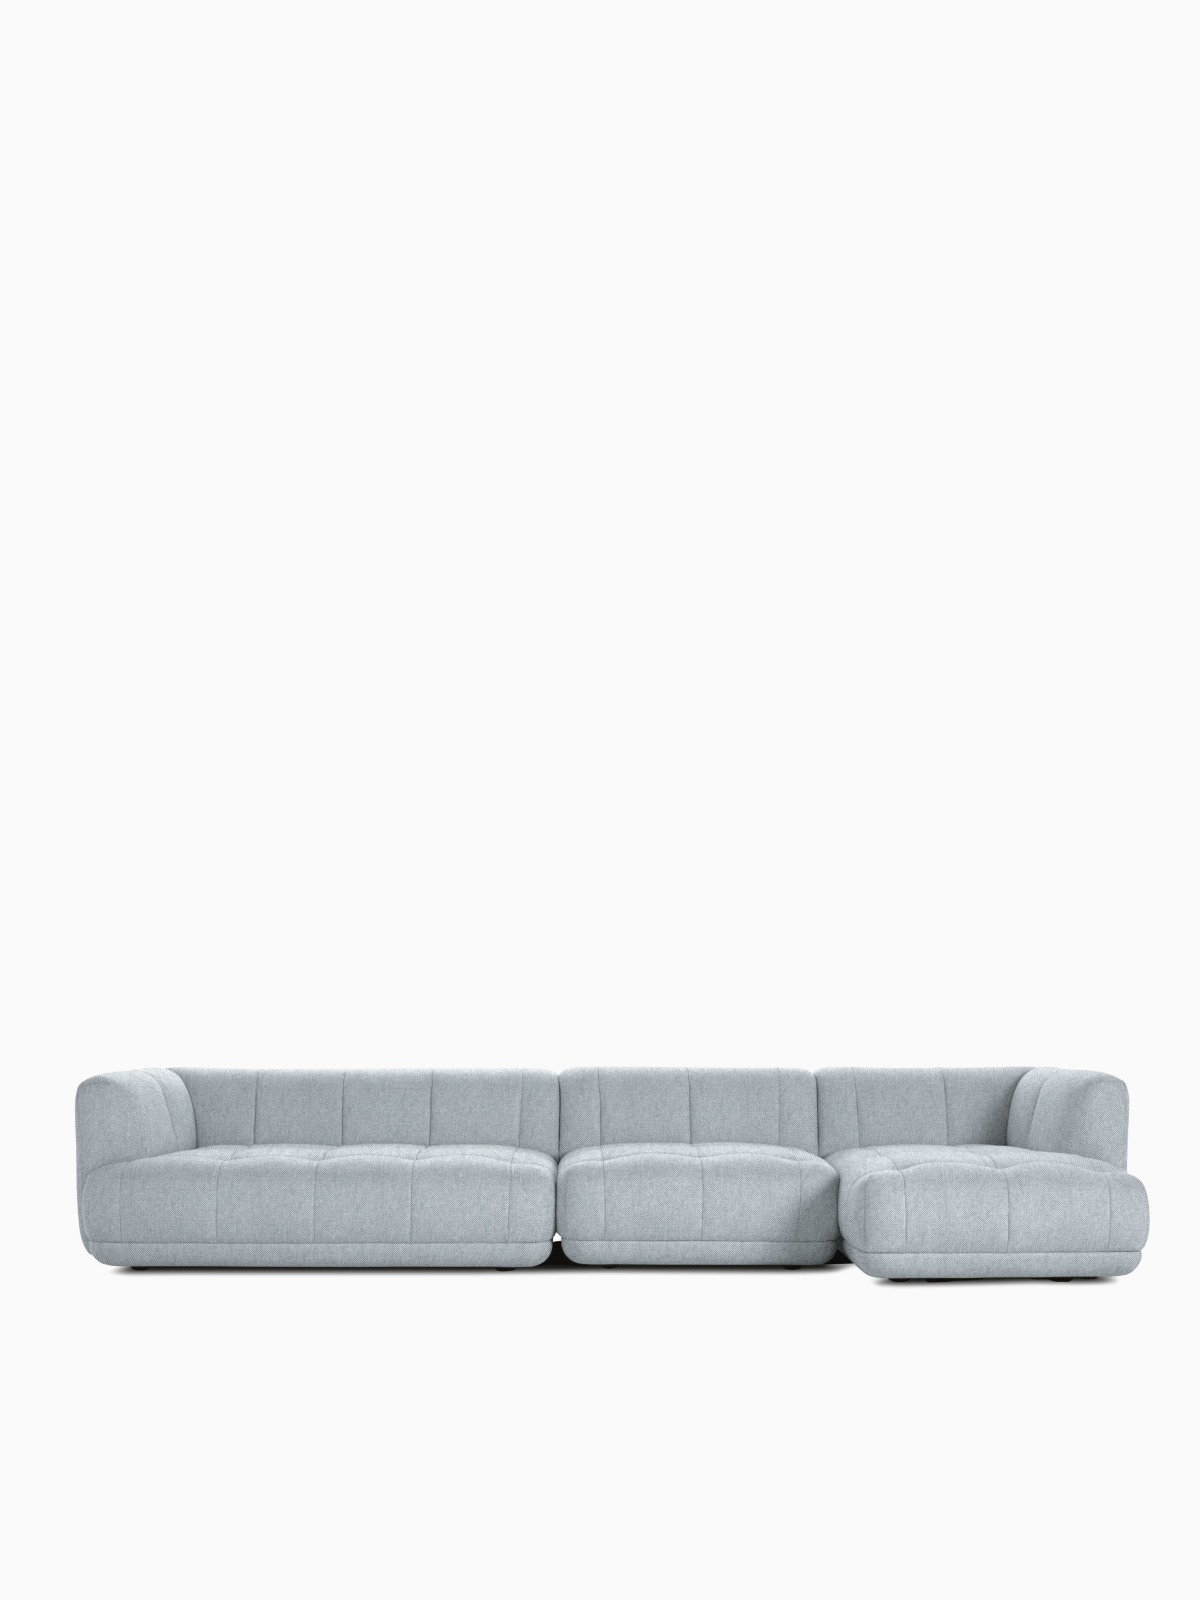 Quilton Sectional Sofas